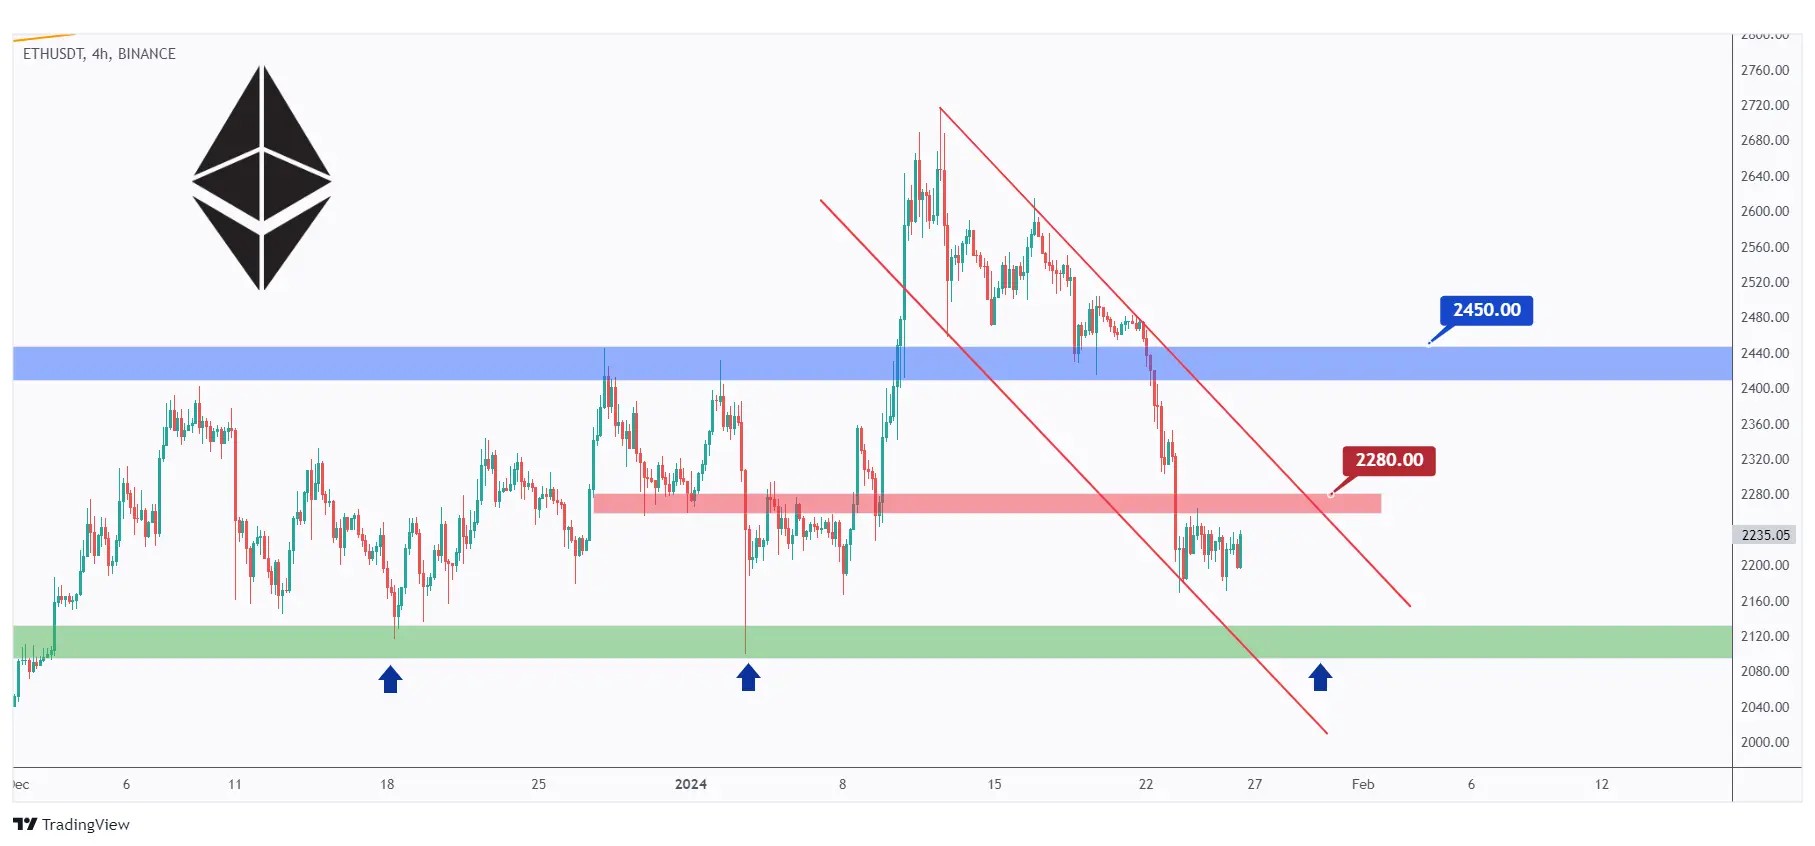 ETH 4h chart showing the overall bearish bias trading within the falling channel and the last major high at $2280 that we need a break above for the bulls to take over.